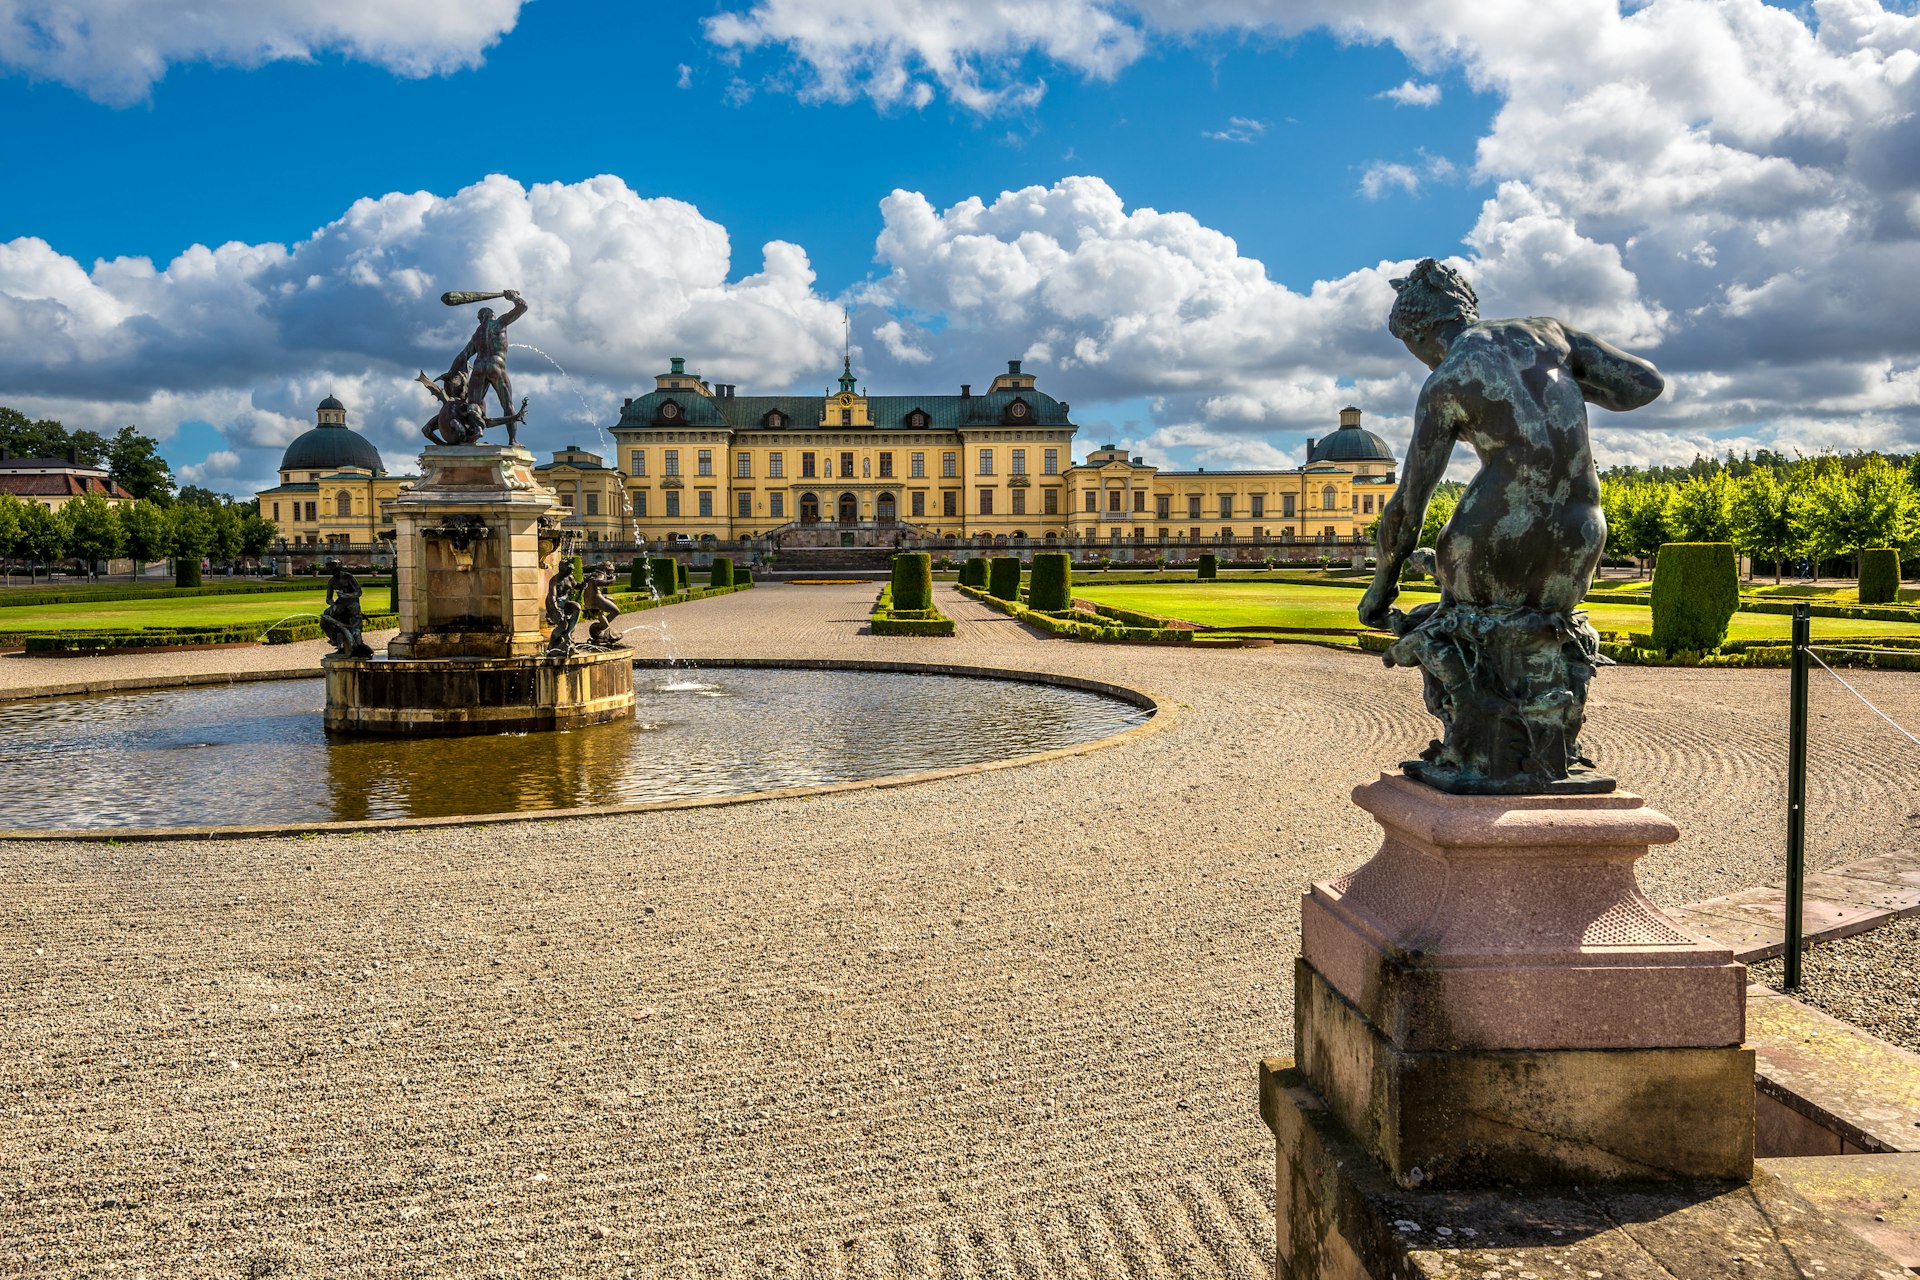 Fountains and statues in manicured grounds with a vast pastel-yellow-colored palace in the distance